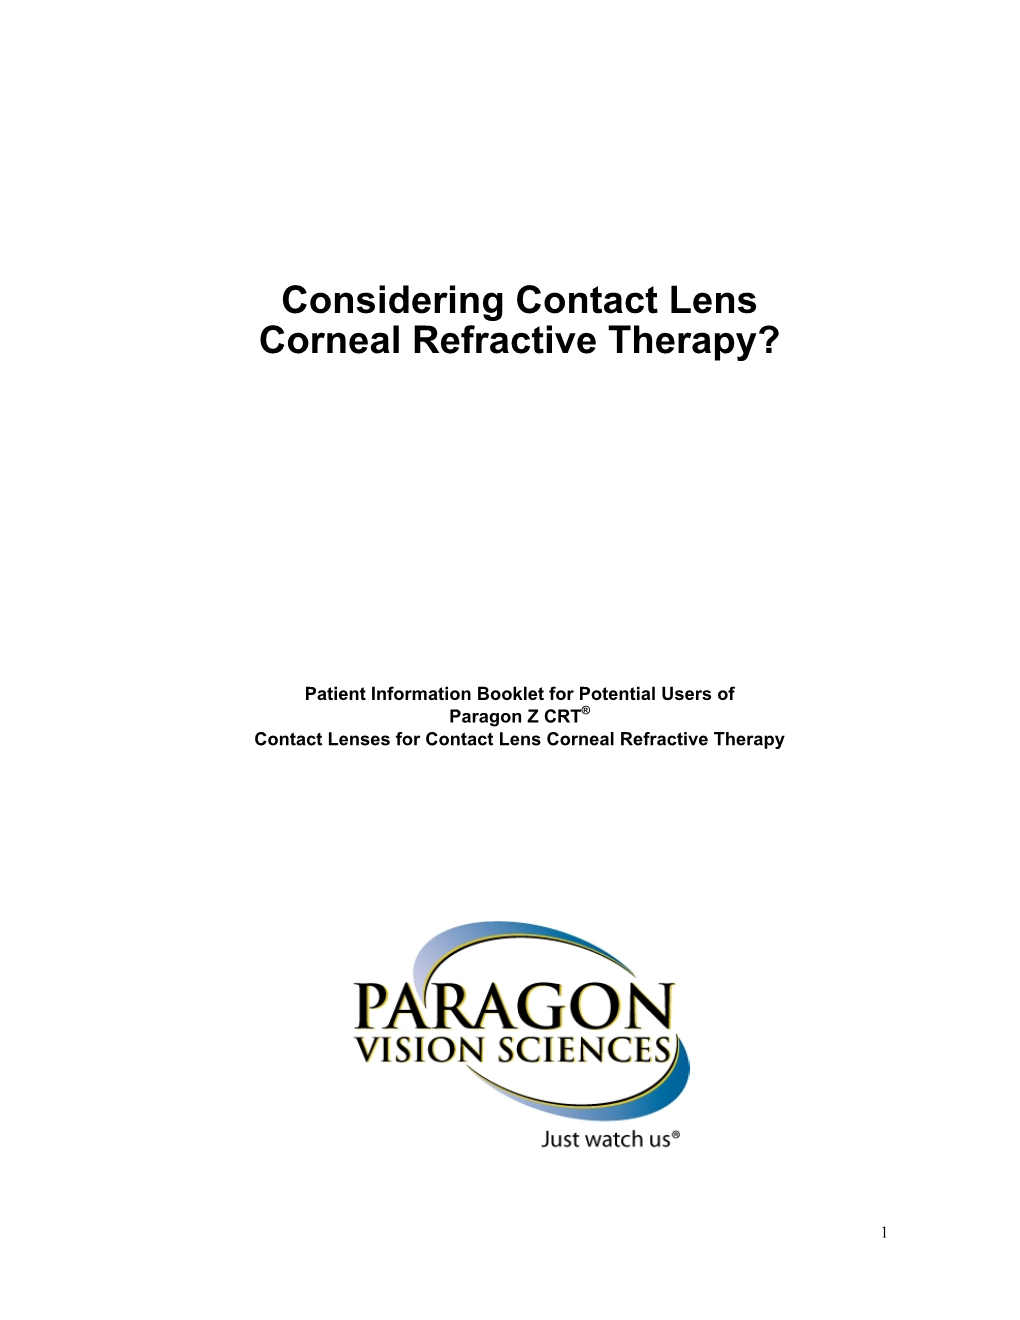 Considering Contact Lens Corneal Refractive Therapy?